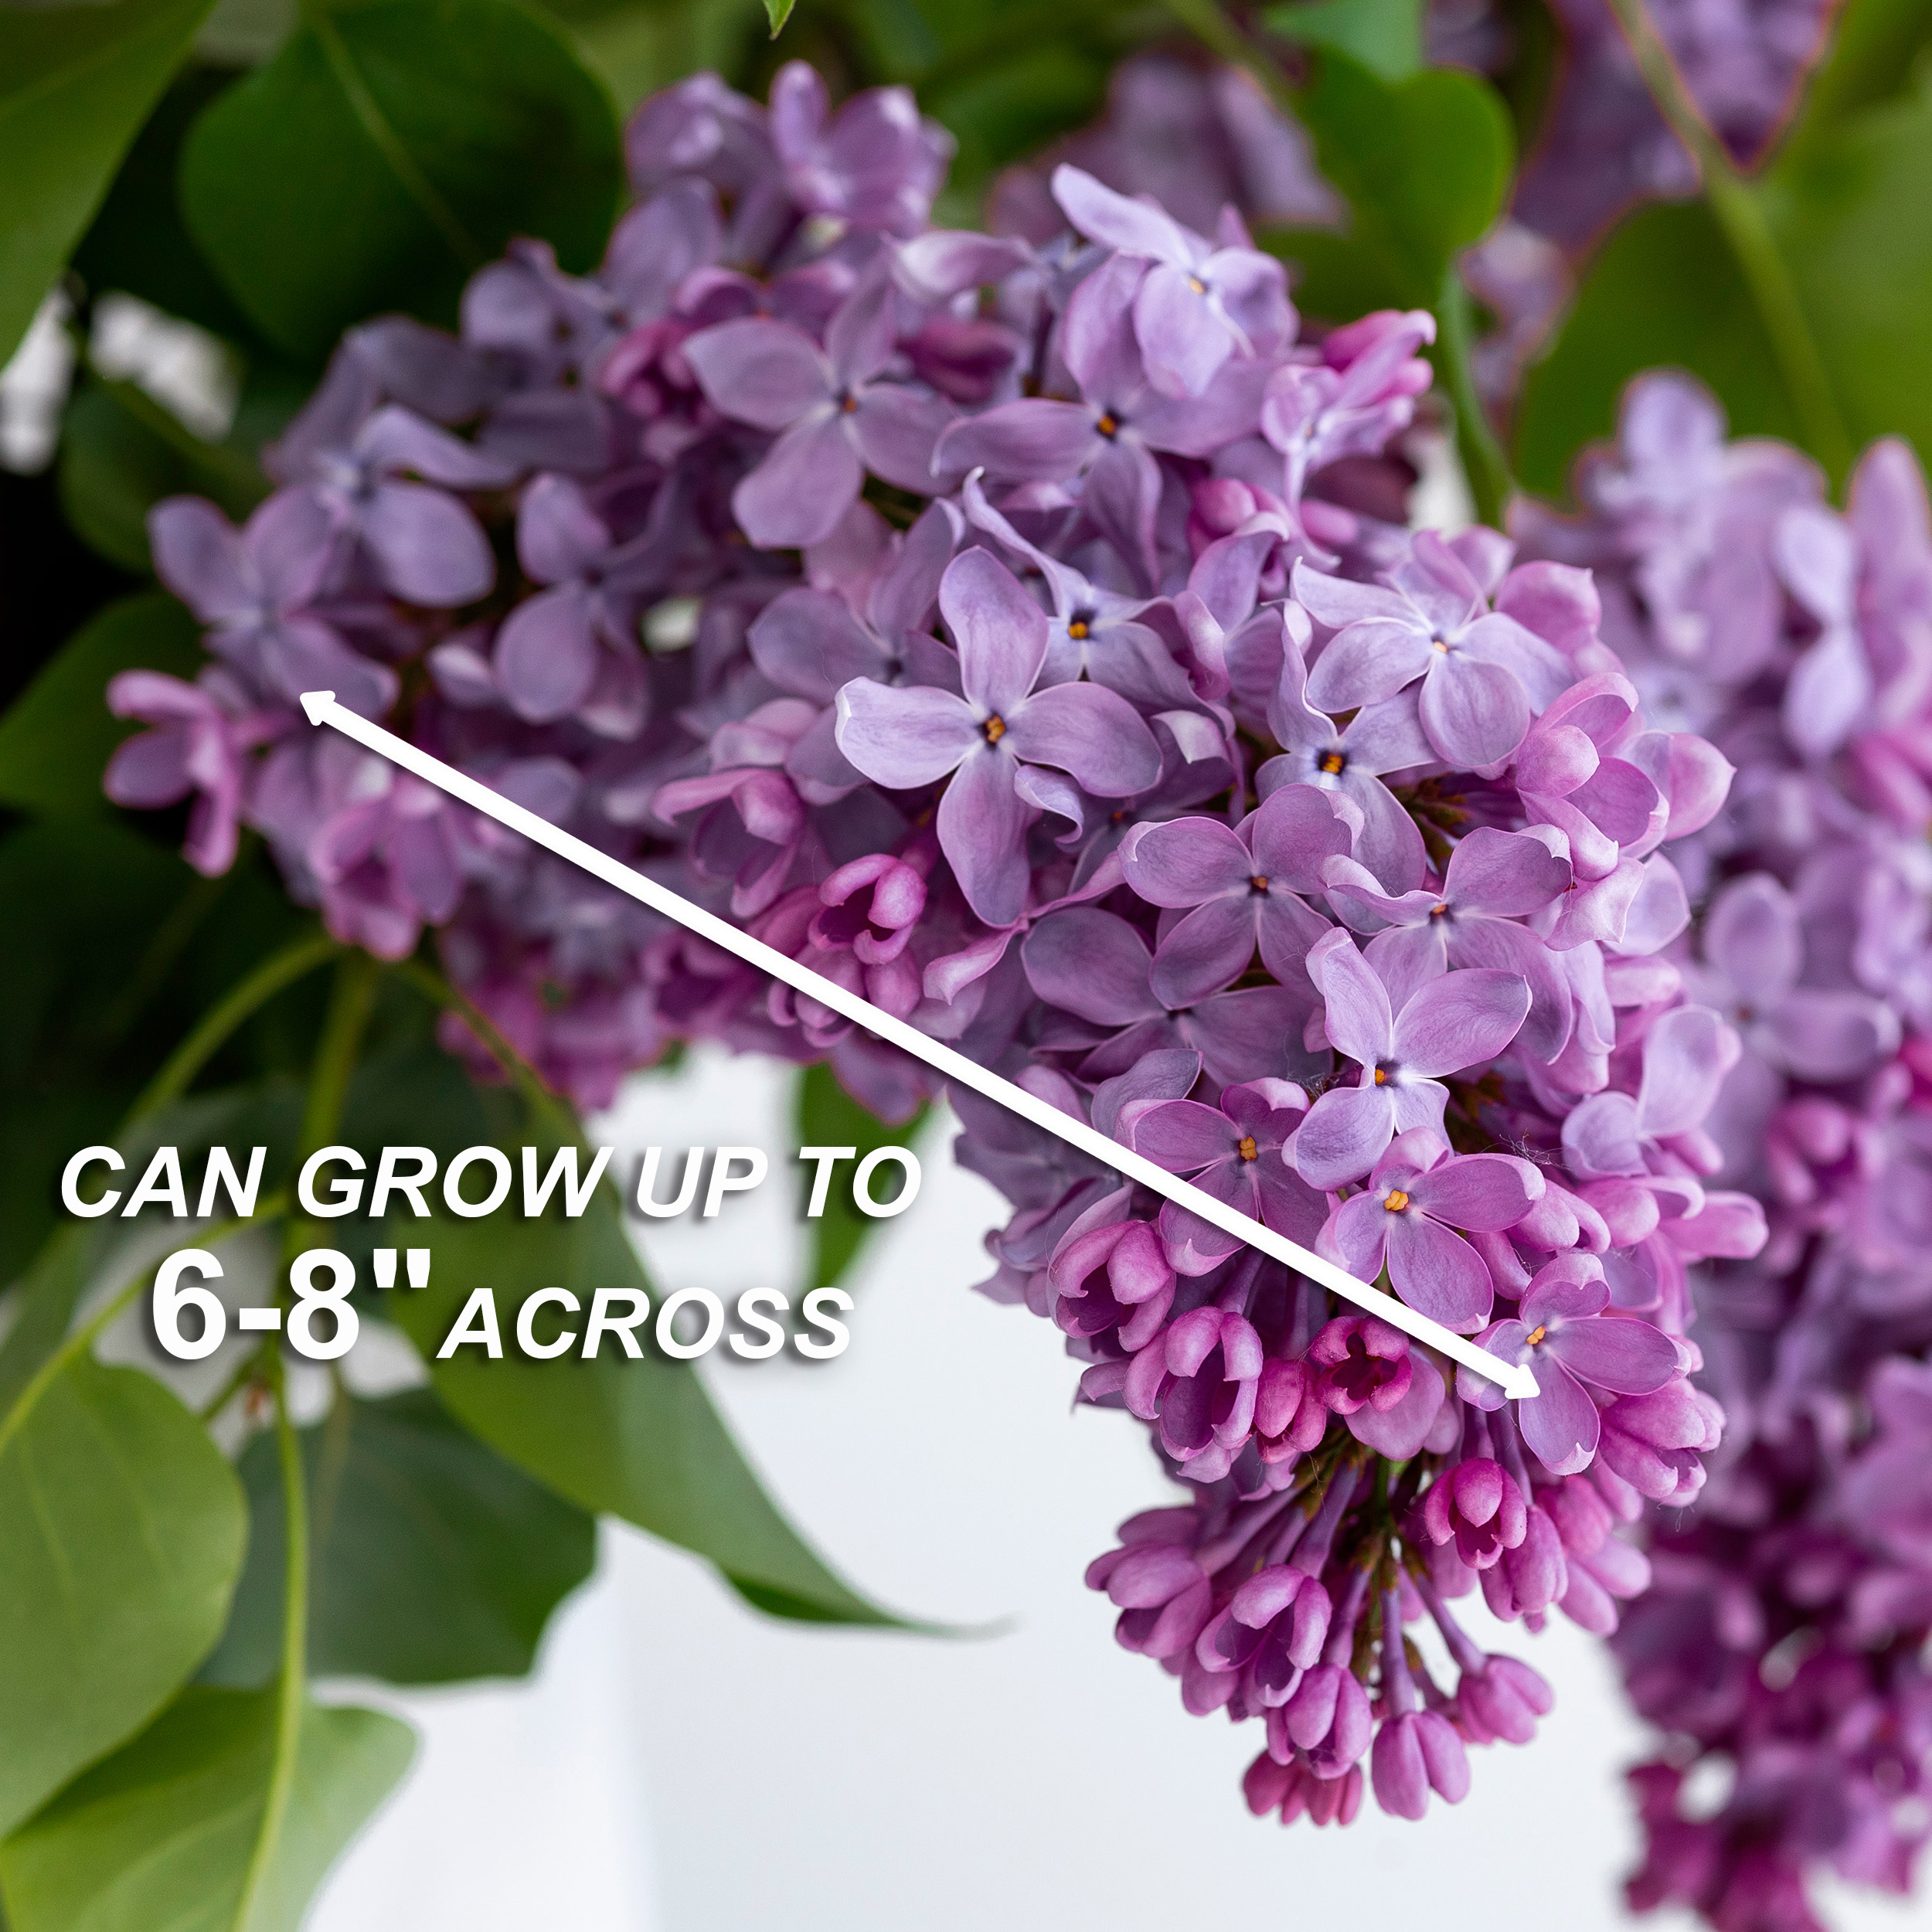 Garden State Bulb Common Purple Lilac Shrub, Live Bare Root (Bag of 1) - image 4 of 8